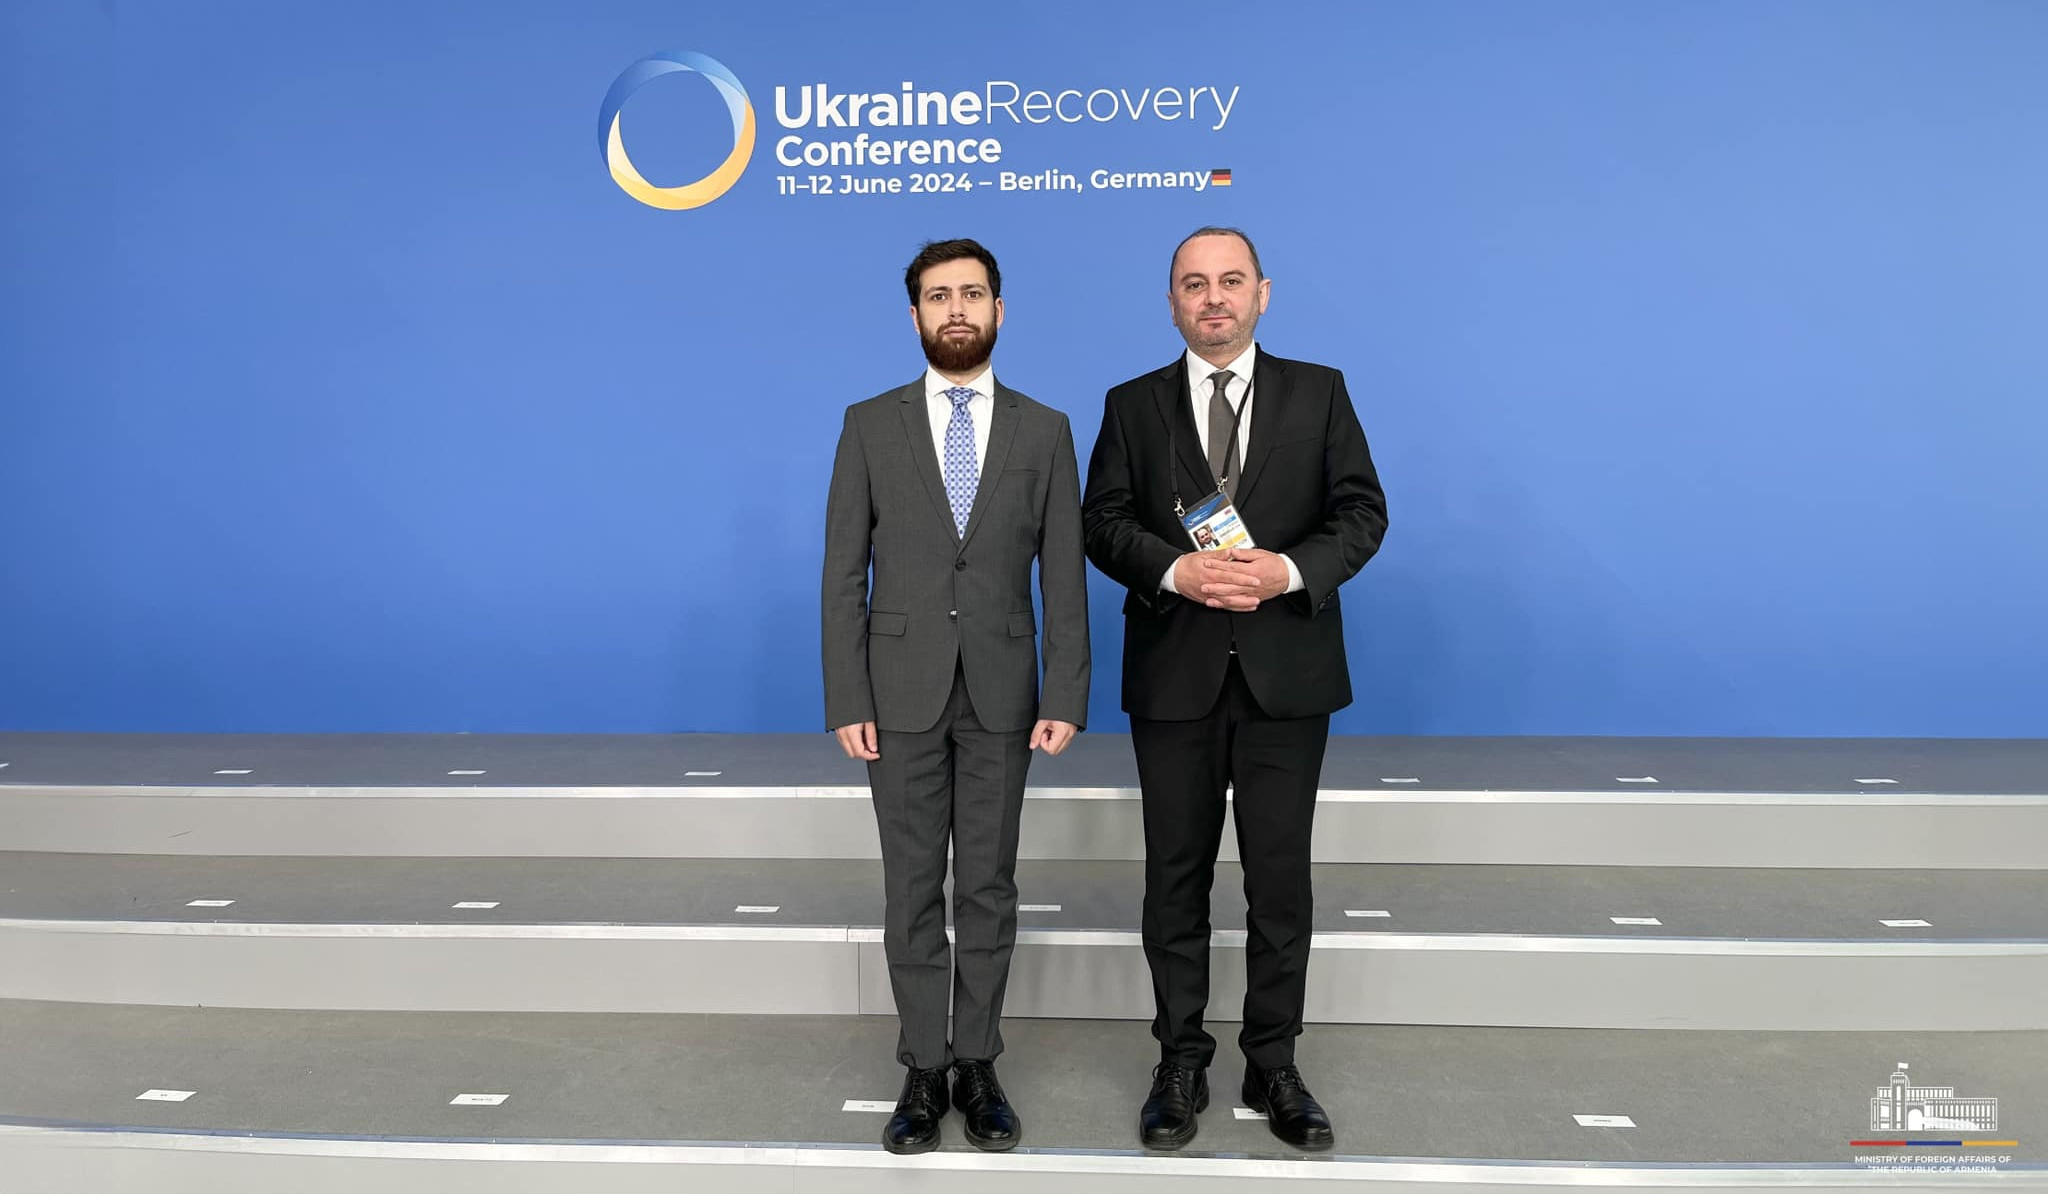 We realize importance of peace: Vahan Kostanyan at conference on reconstruction of Ukraine